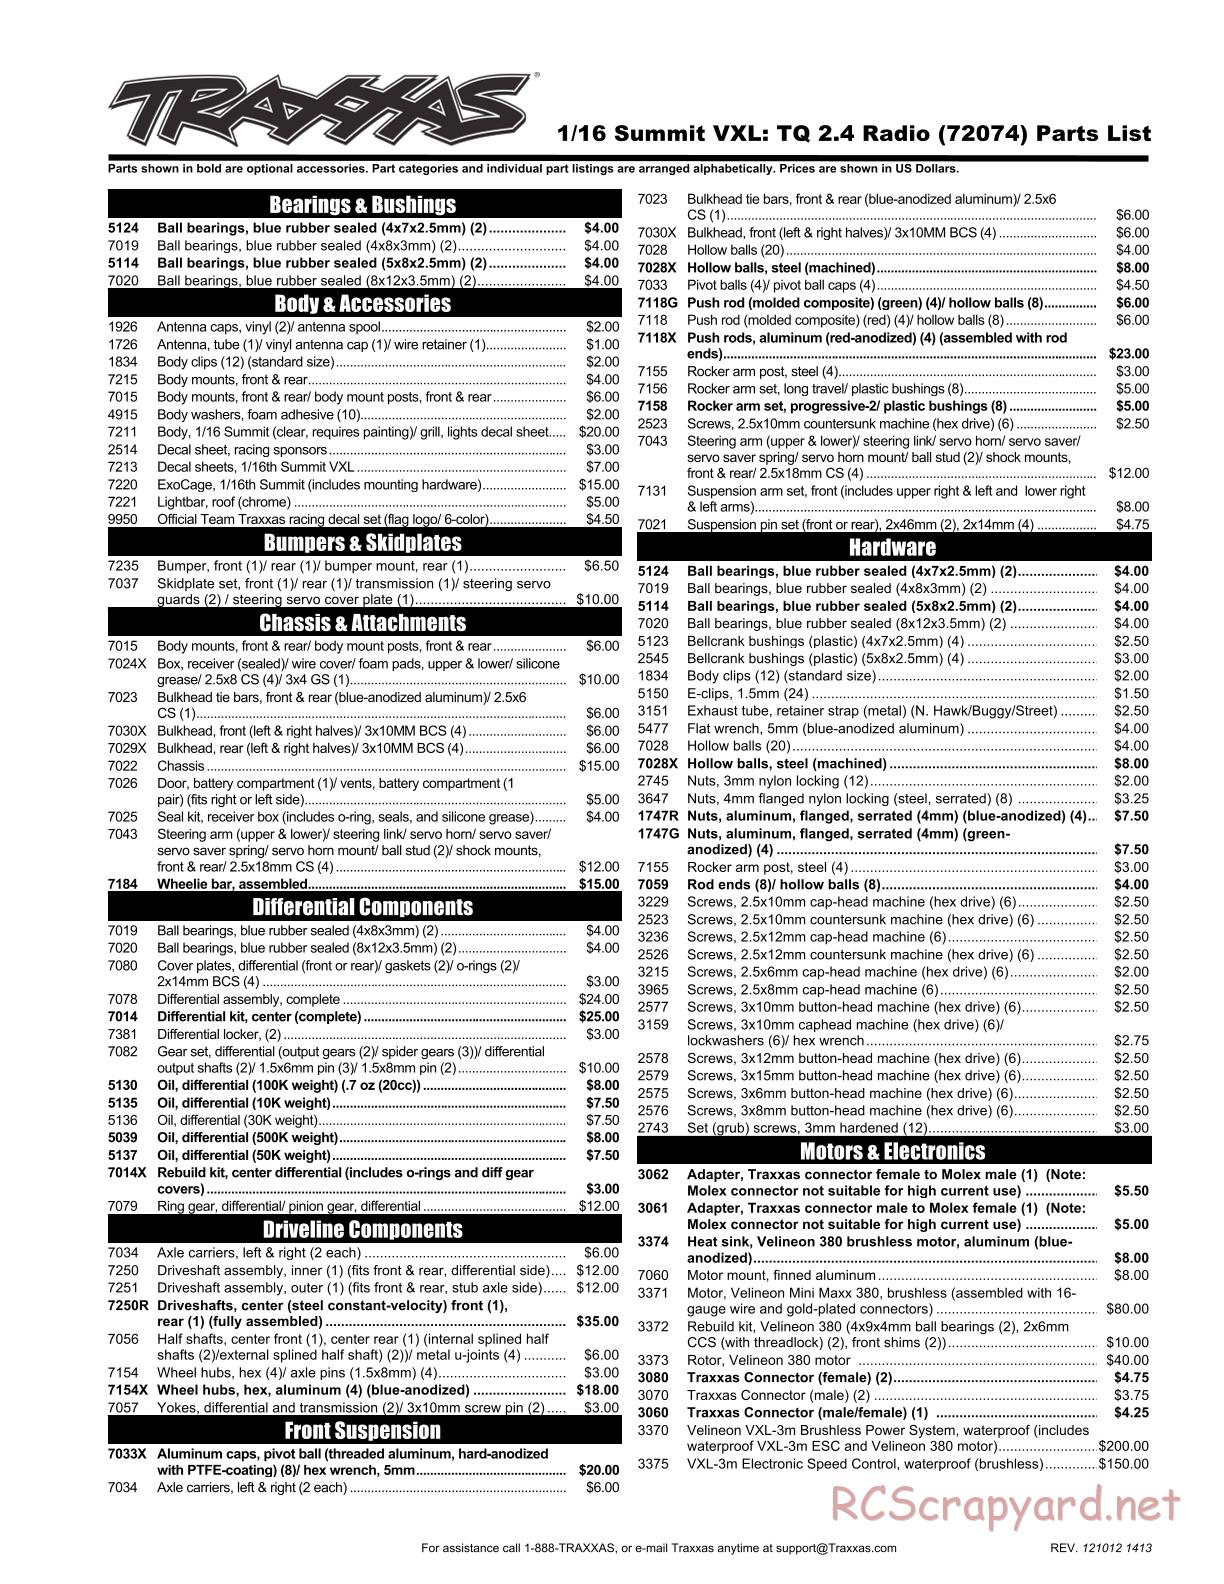 Traxxas - 1/16 Summit VXL (2012) - Parts List - Page 1